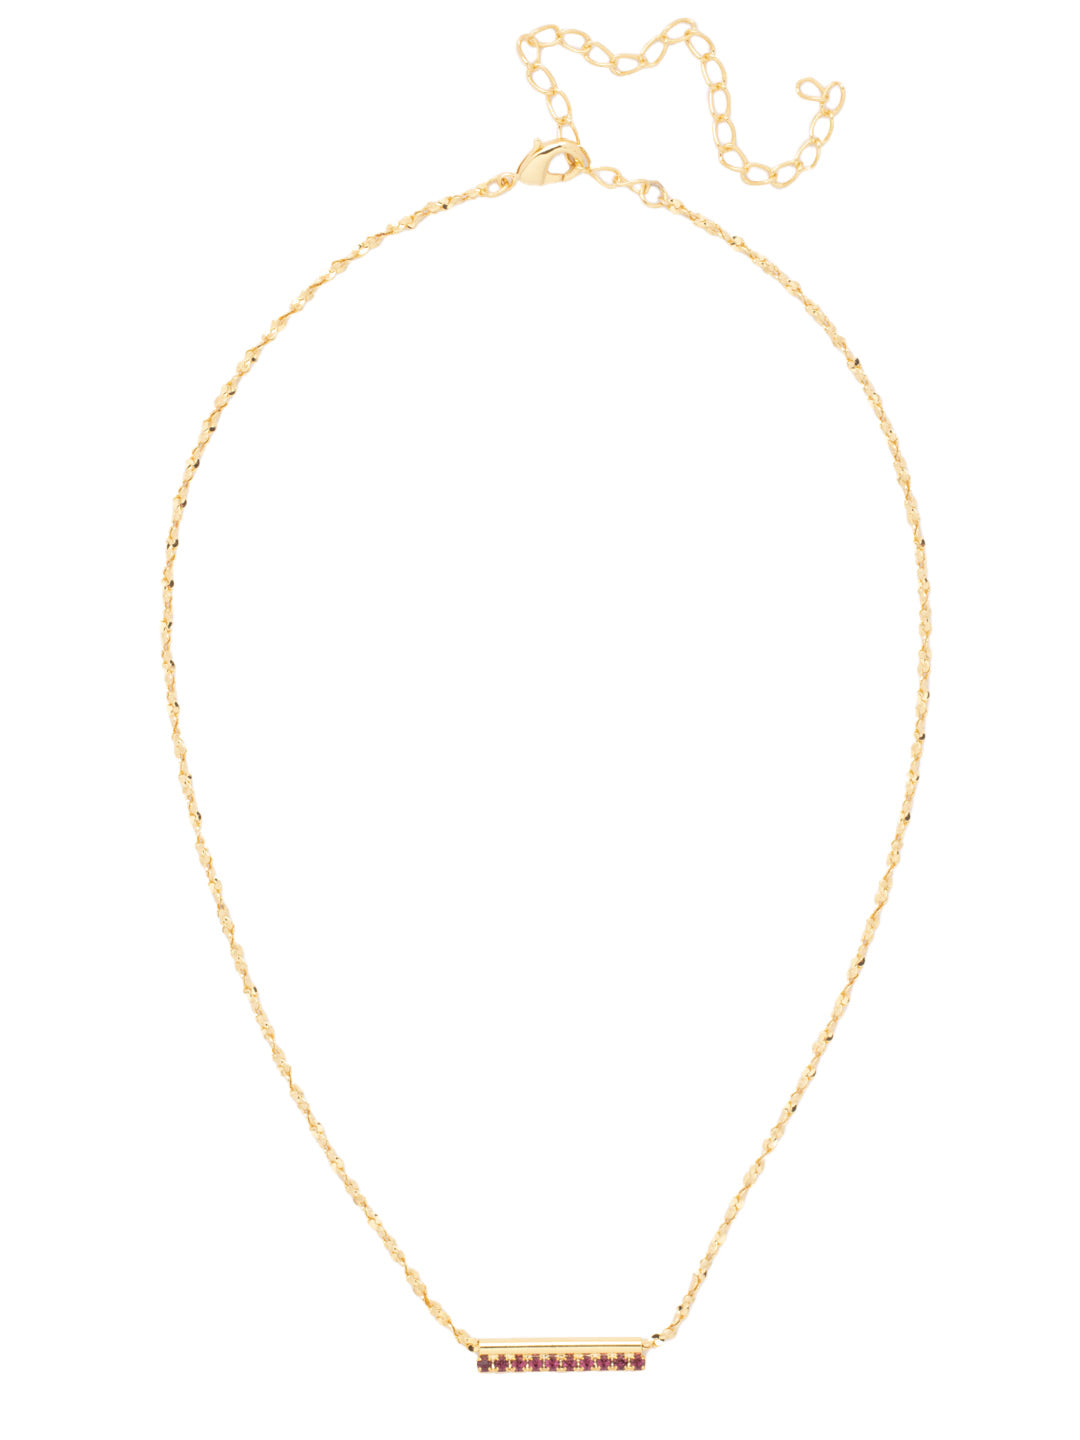 Rosamund Tennis Necklace - NFL7BGMRL - <p>The Rosamund Tennis Necklace features a dainty crystal-embellished metal bar on an adjustable chain, secured with a lobster claw clasp. From Sorrelli's Merlot collection in our Bright Gold-tone finish.</p>